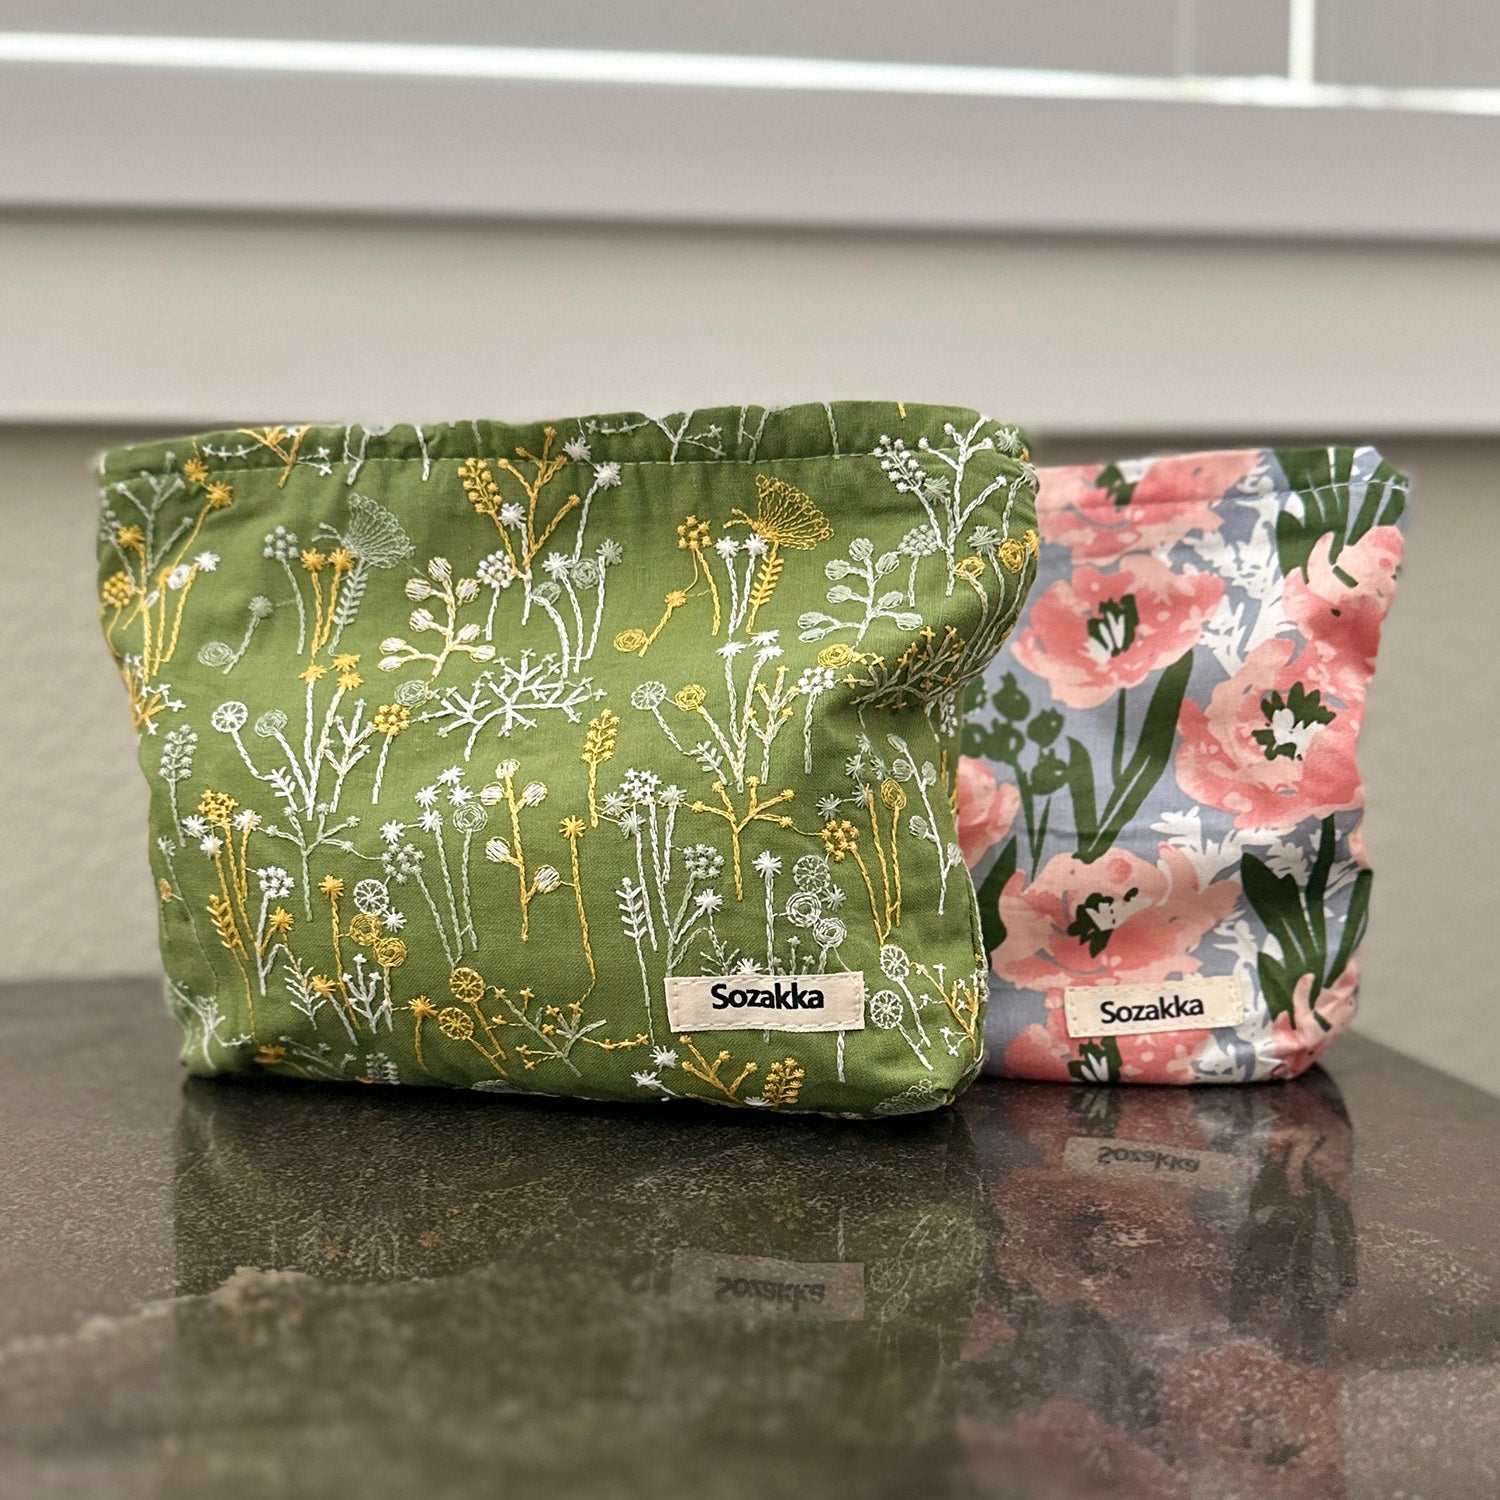 Wrapables Cosmetic Pouch, Makeup and Toiletry Travel Bag